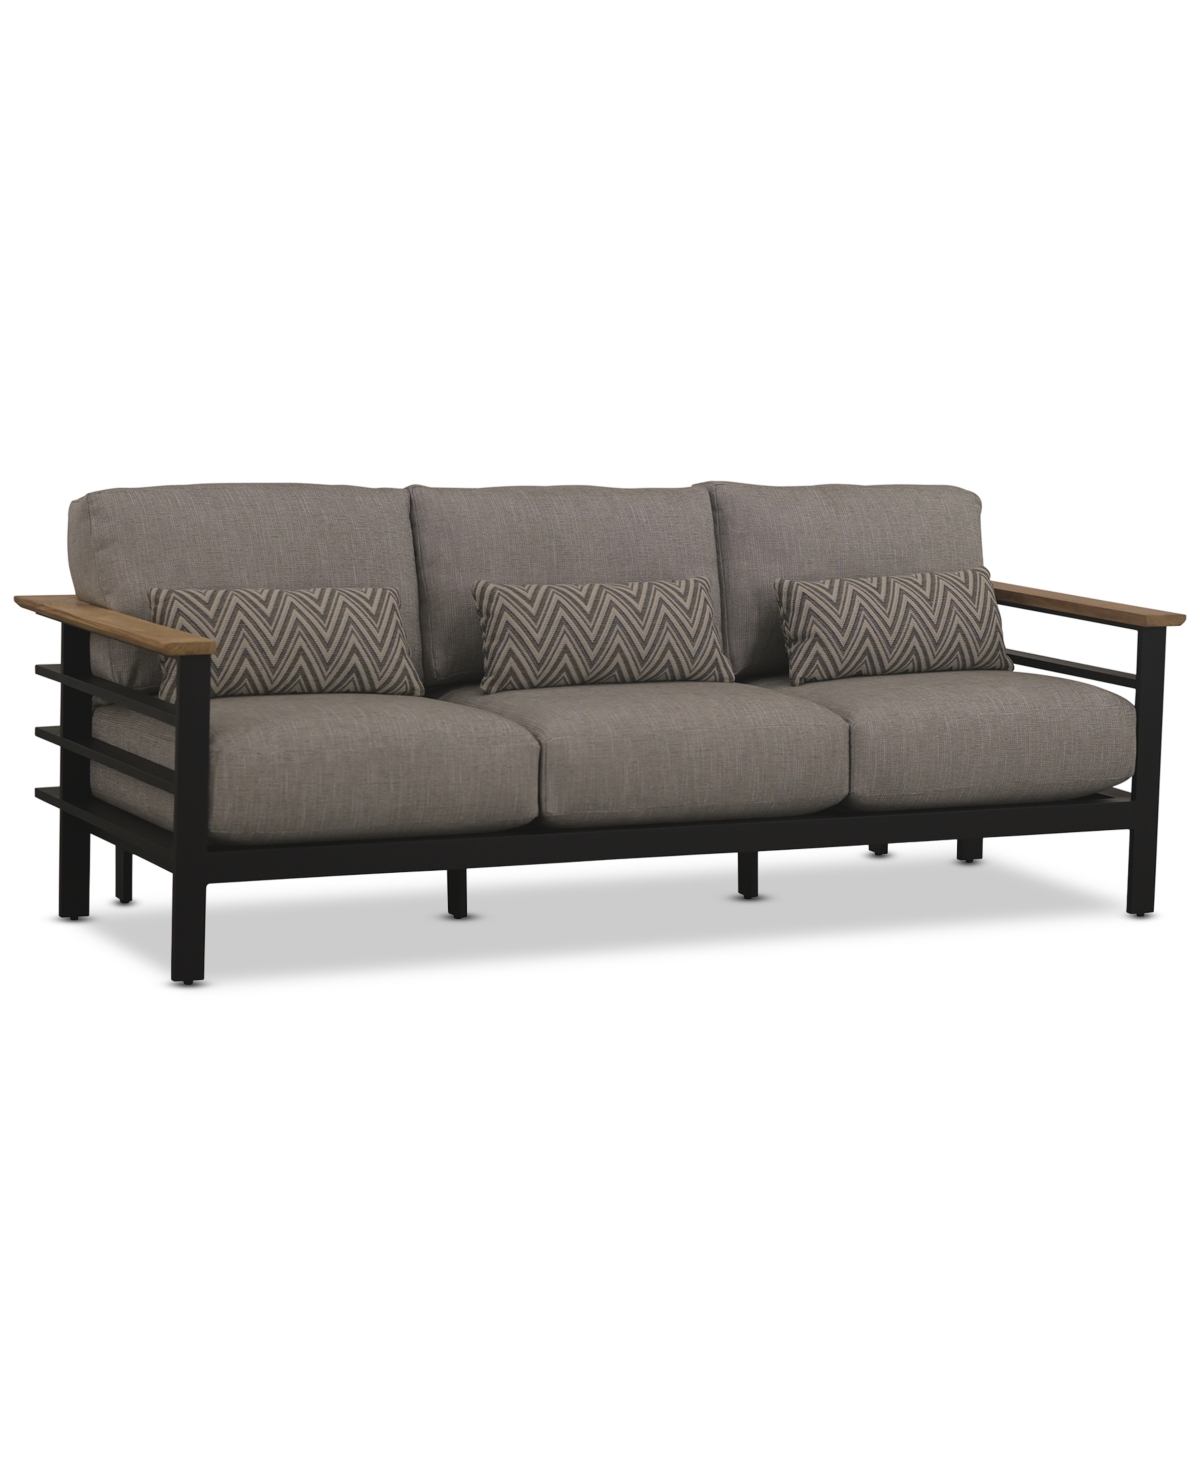 Tommy Bahama South Beach Outdoor Seating Collection In Taupe